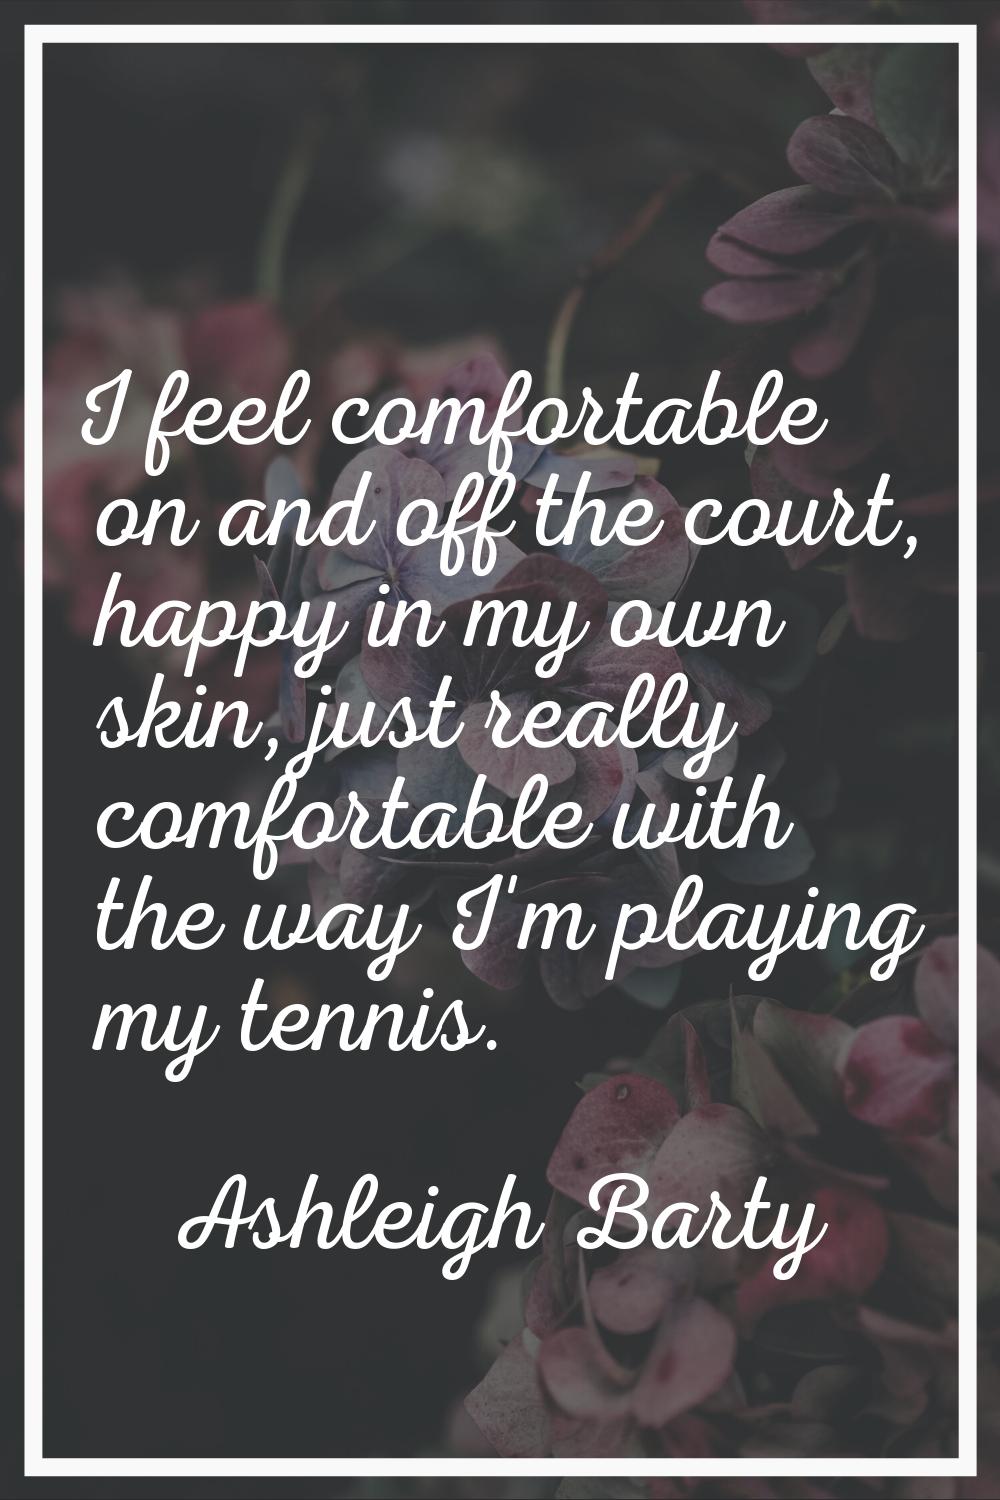 I feel comfortable on and off the court, happy in my own skin, just really comfortable with the way